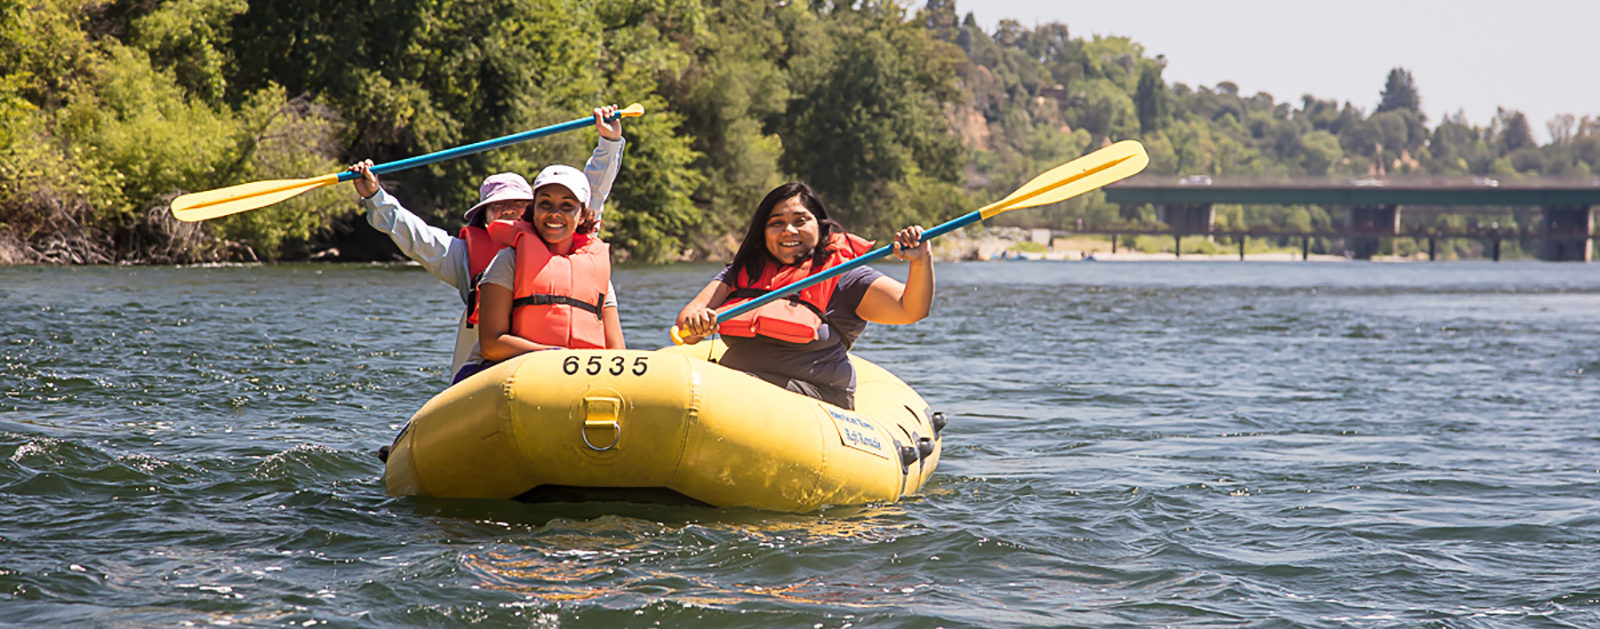 Rafting the American River.